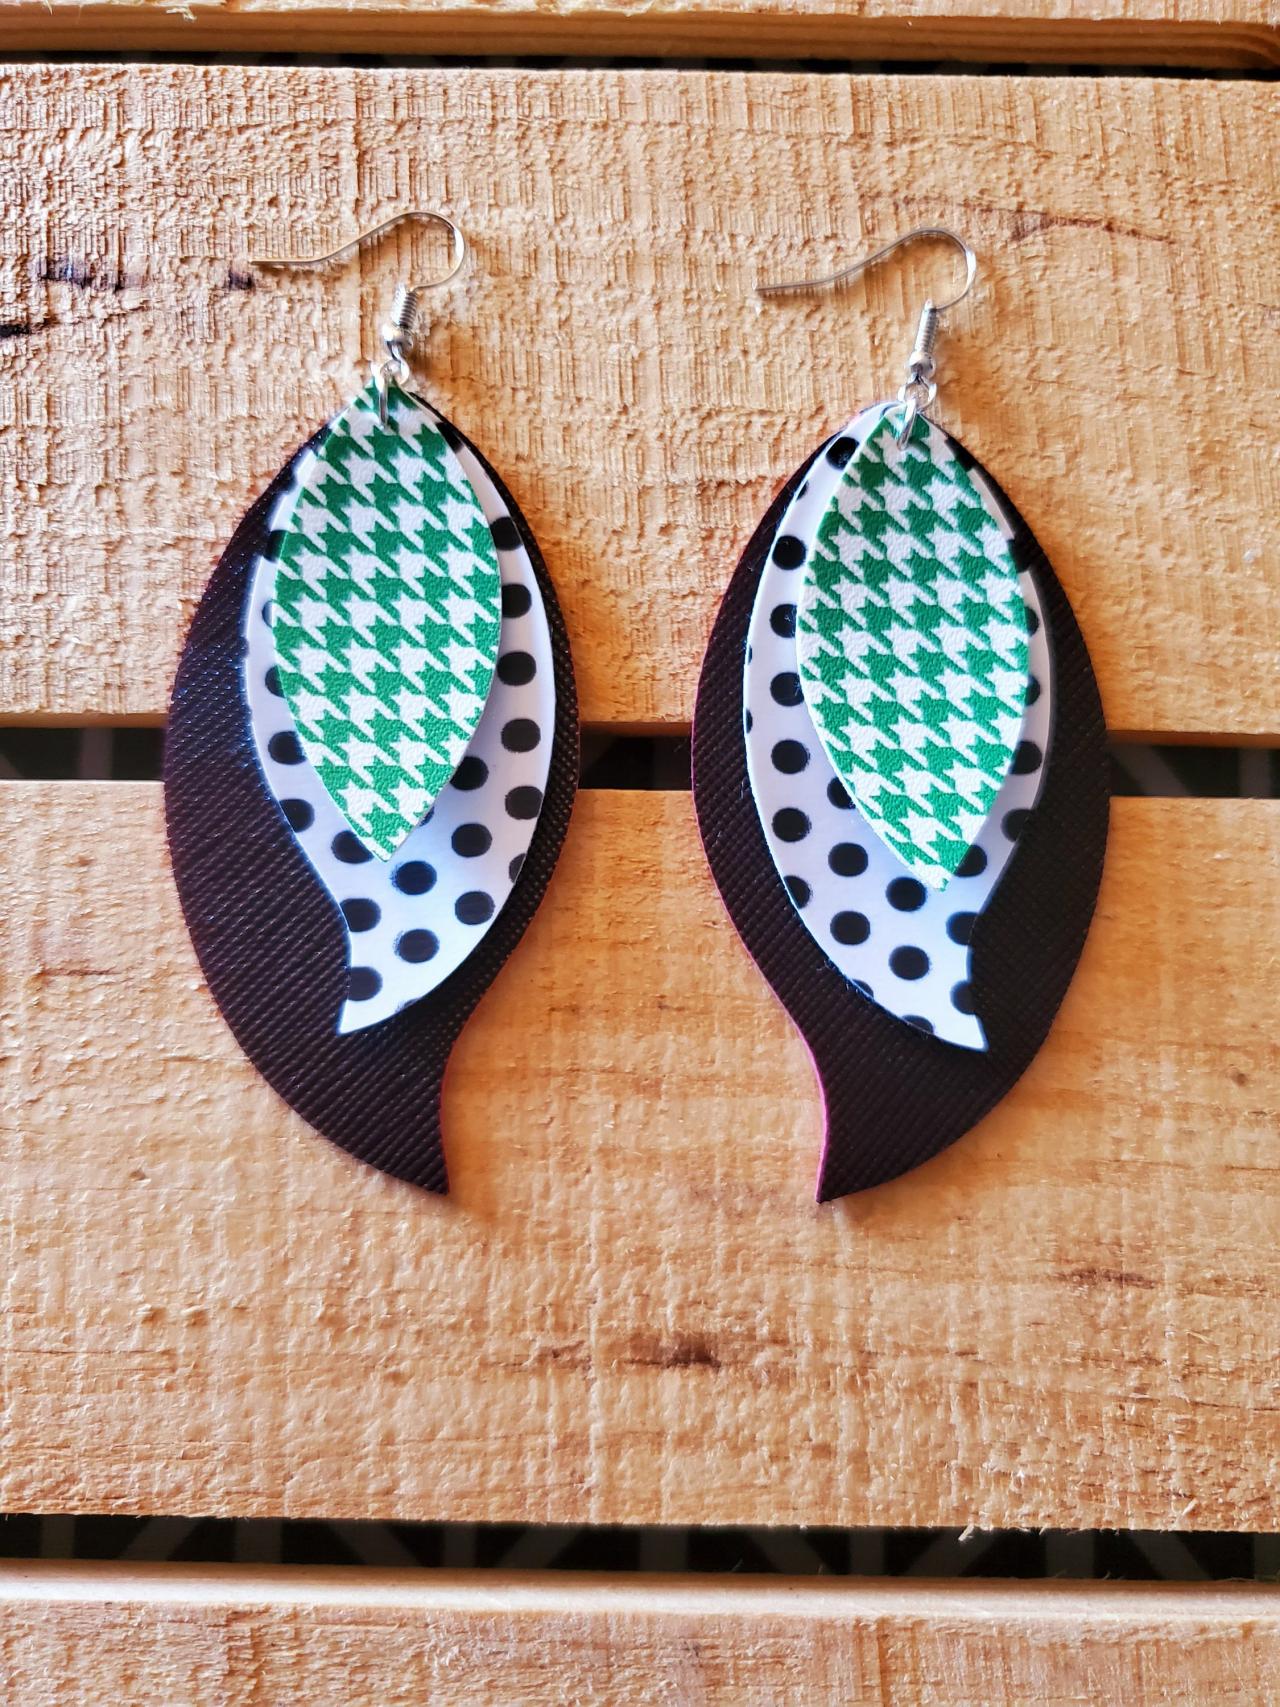 Green Black And White Layered Earrings, Houndstooth Leather Earrings, Polka Dot Earrings, Layered Earrings, Boho Chic Jewelry, Womans Gift